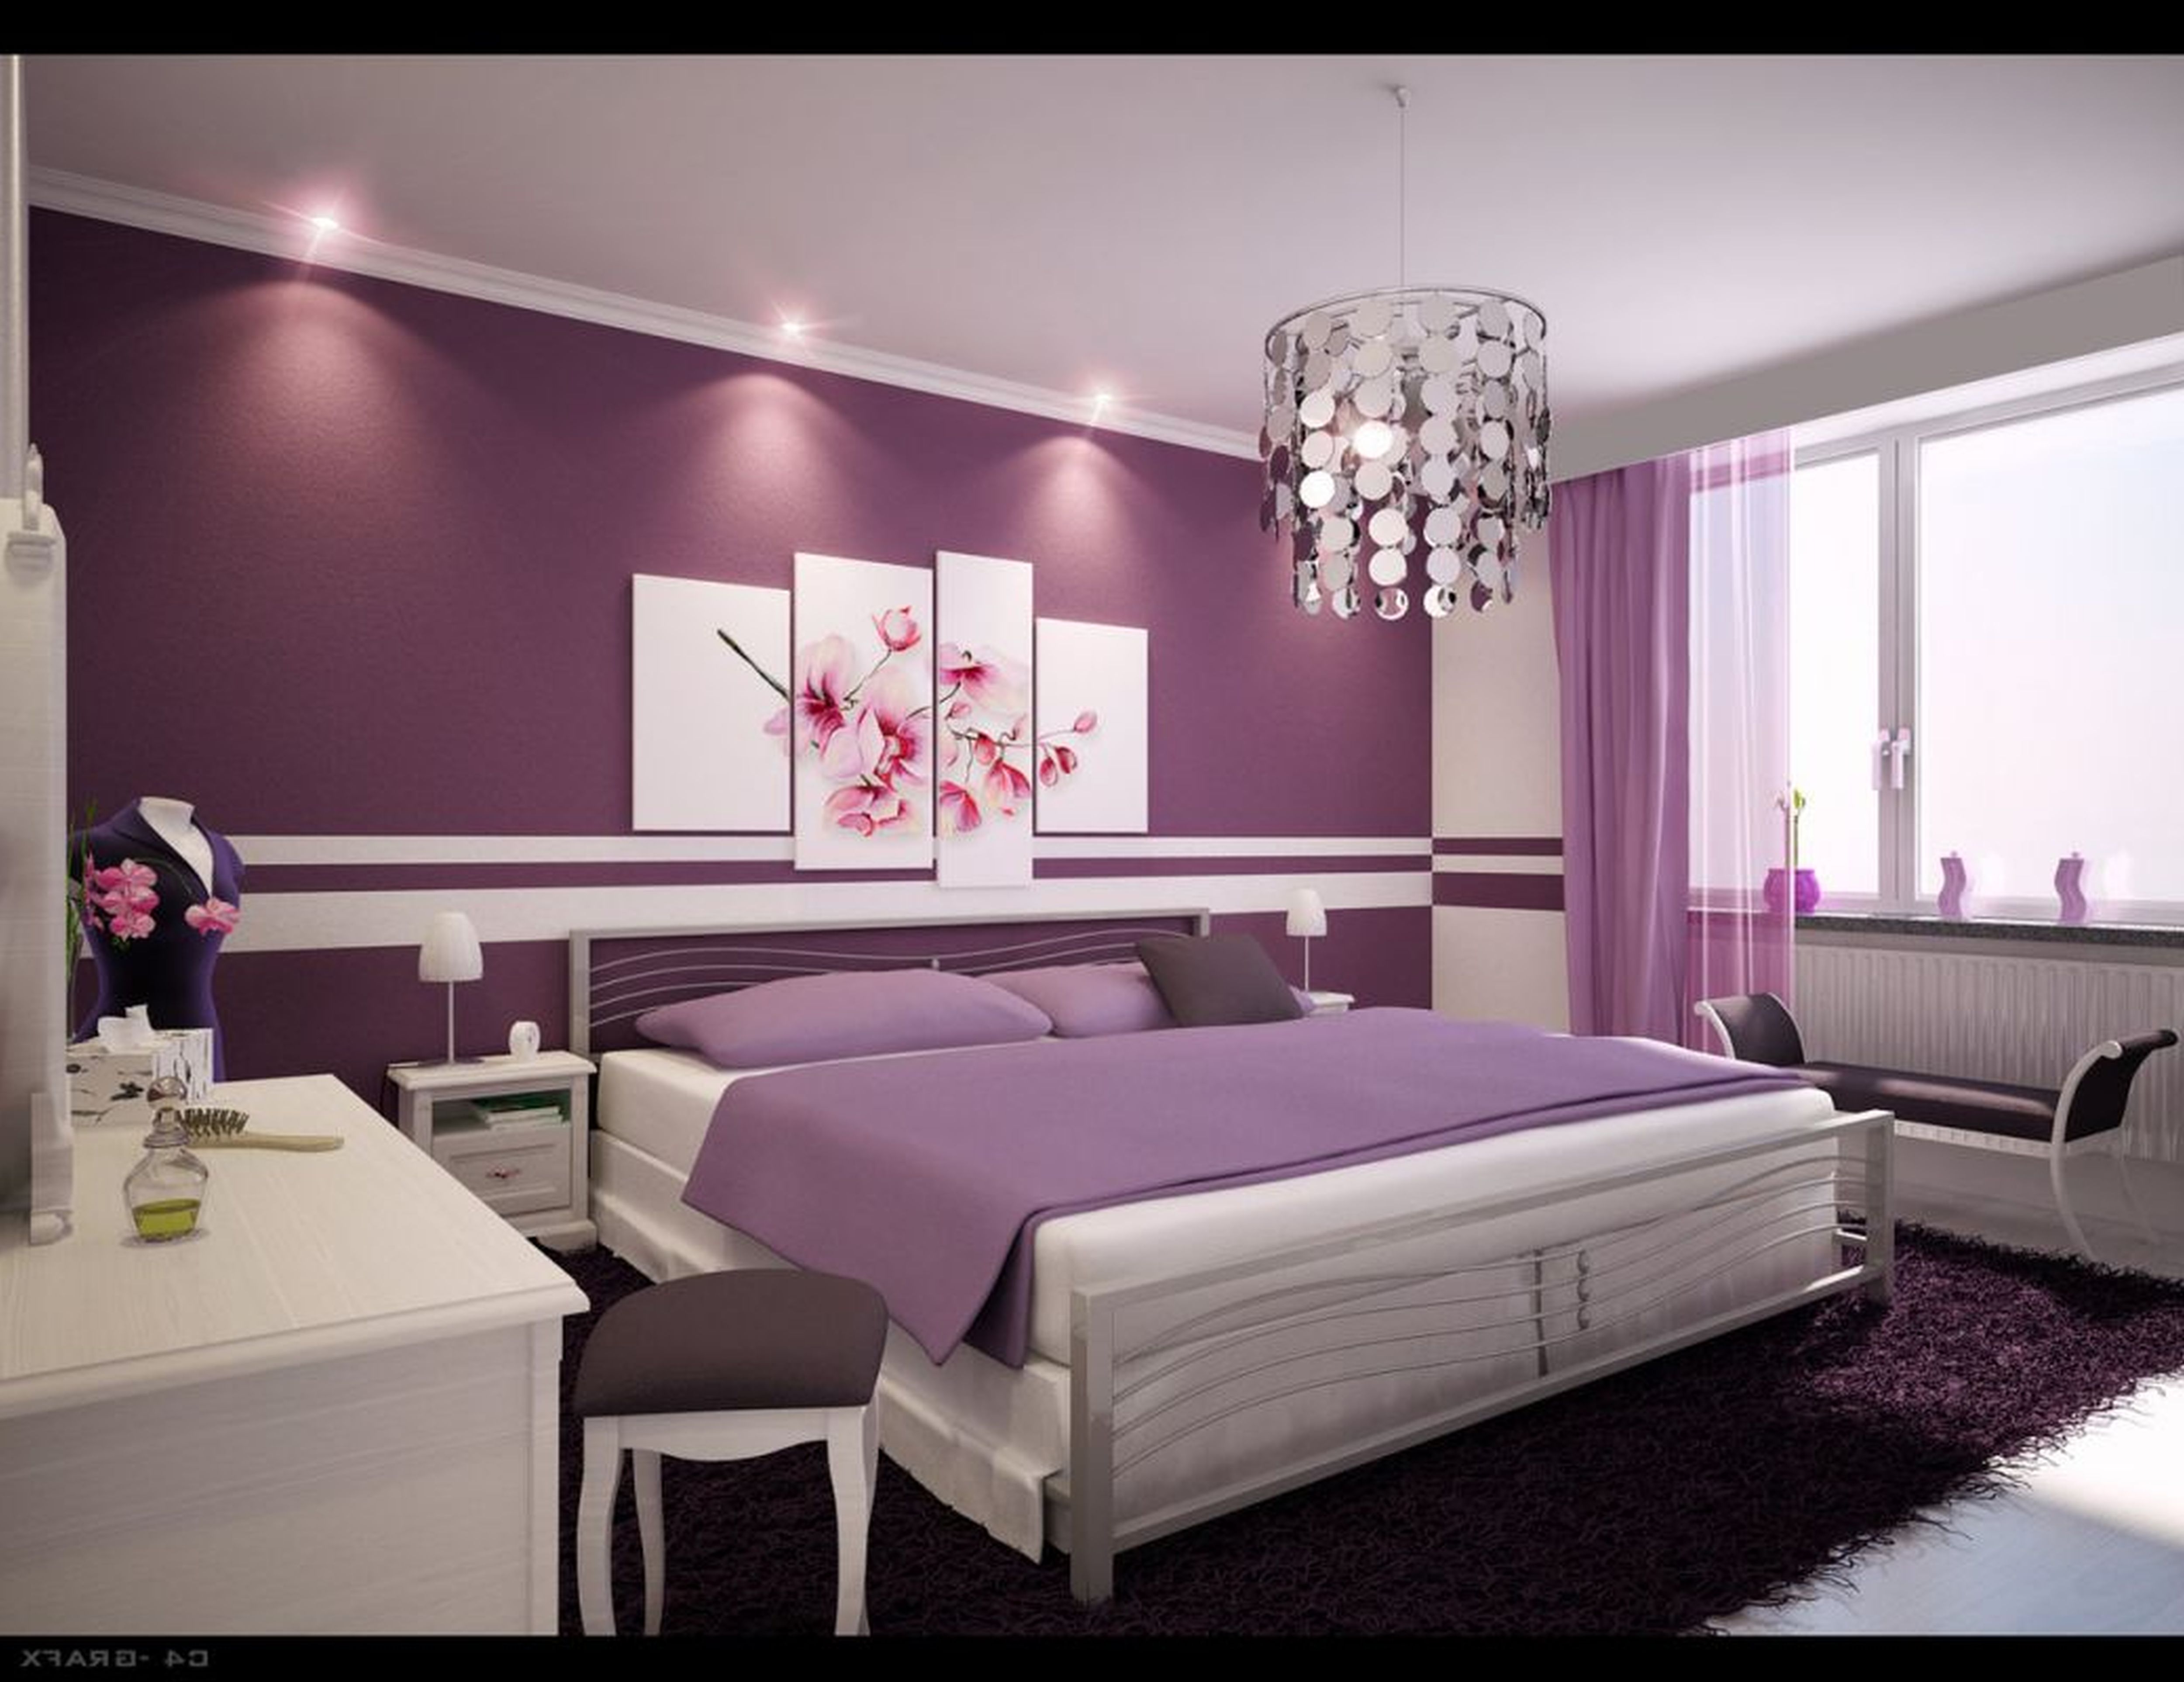 Remarkable Grey And Purple Bedroom Ideas - Mosca Homes